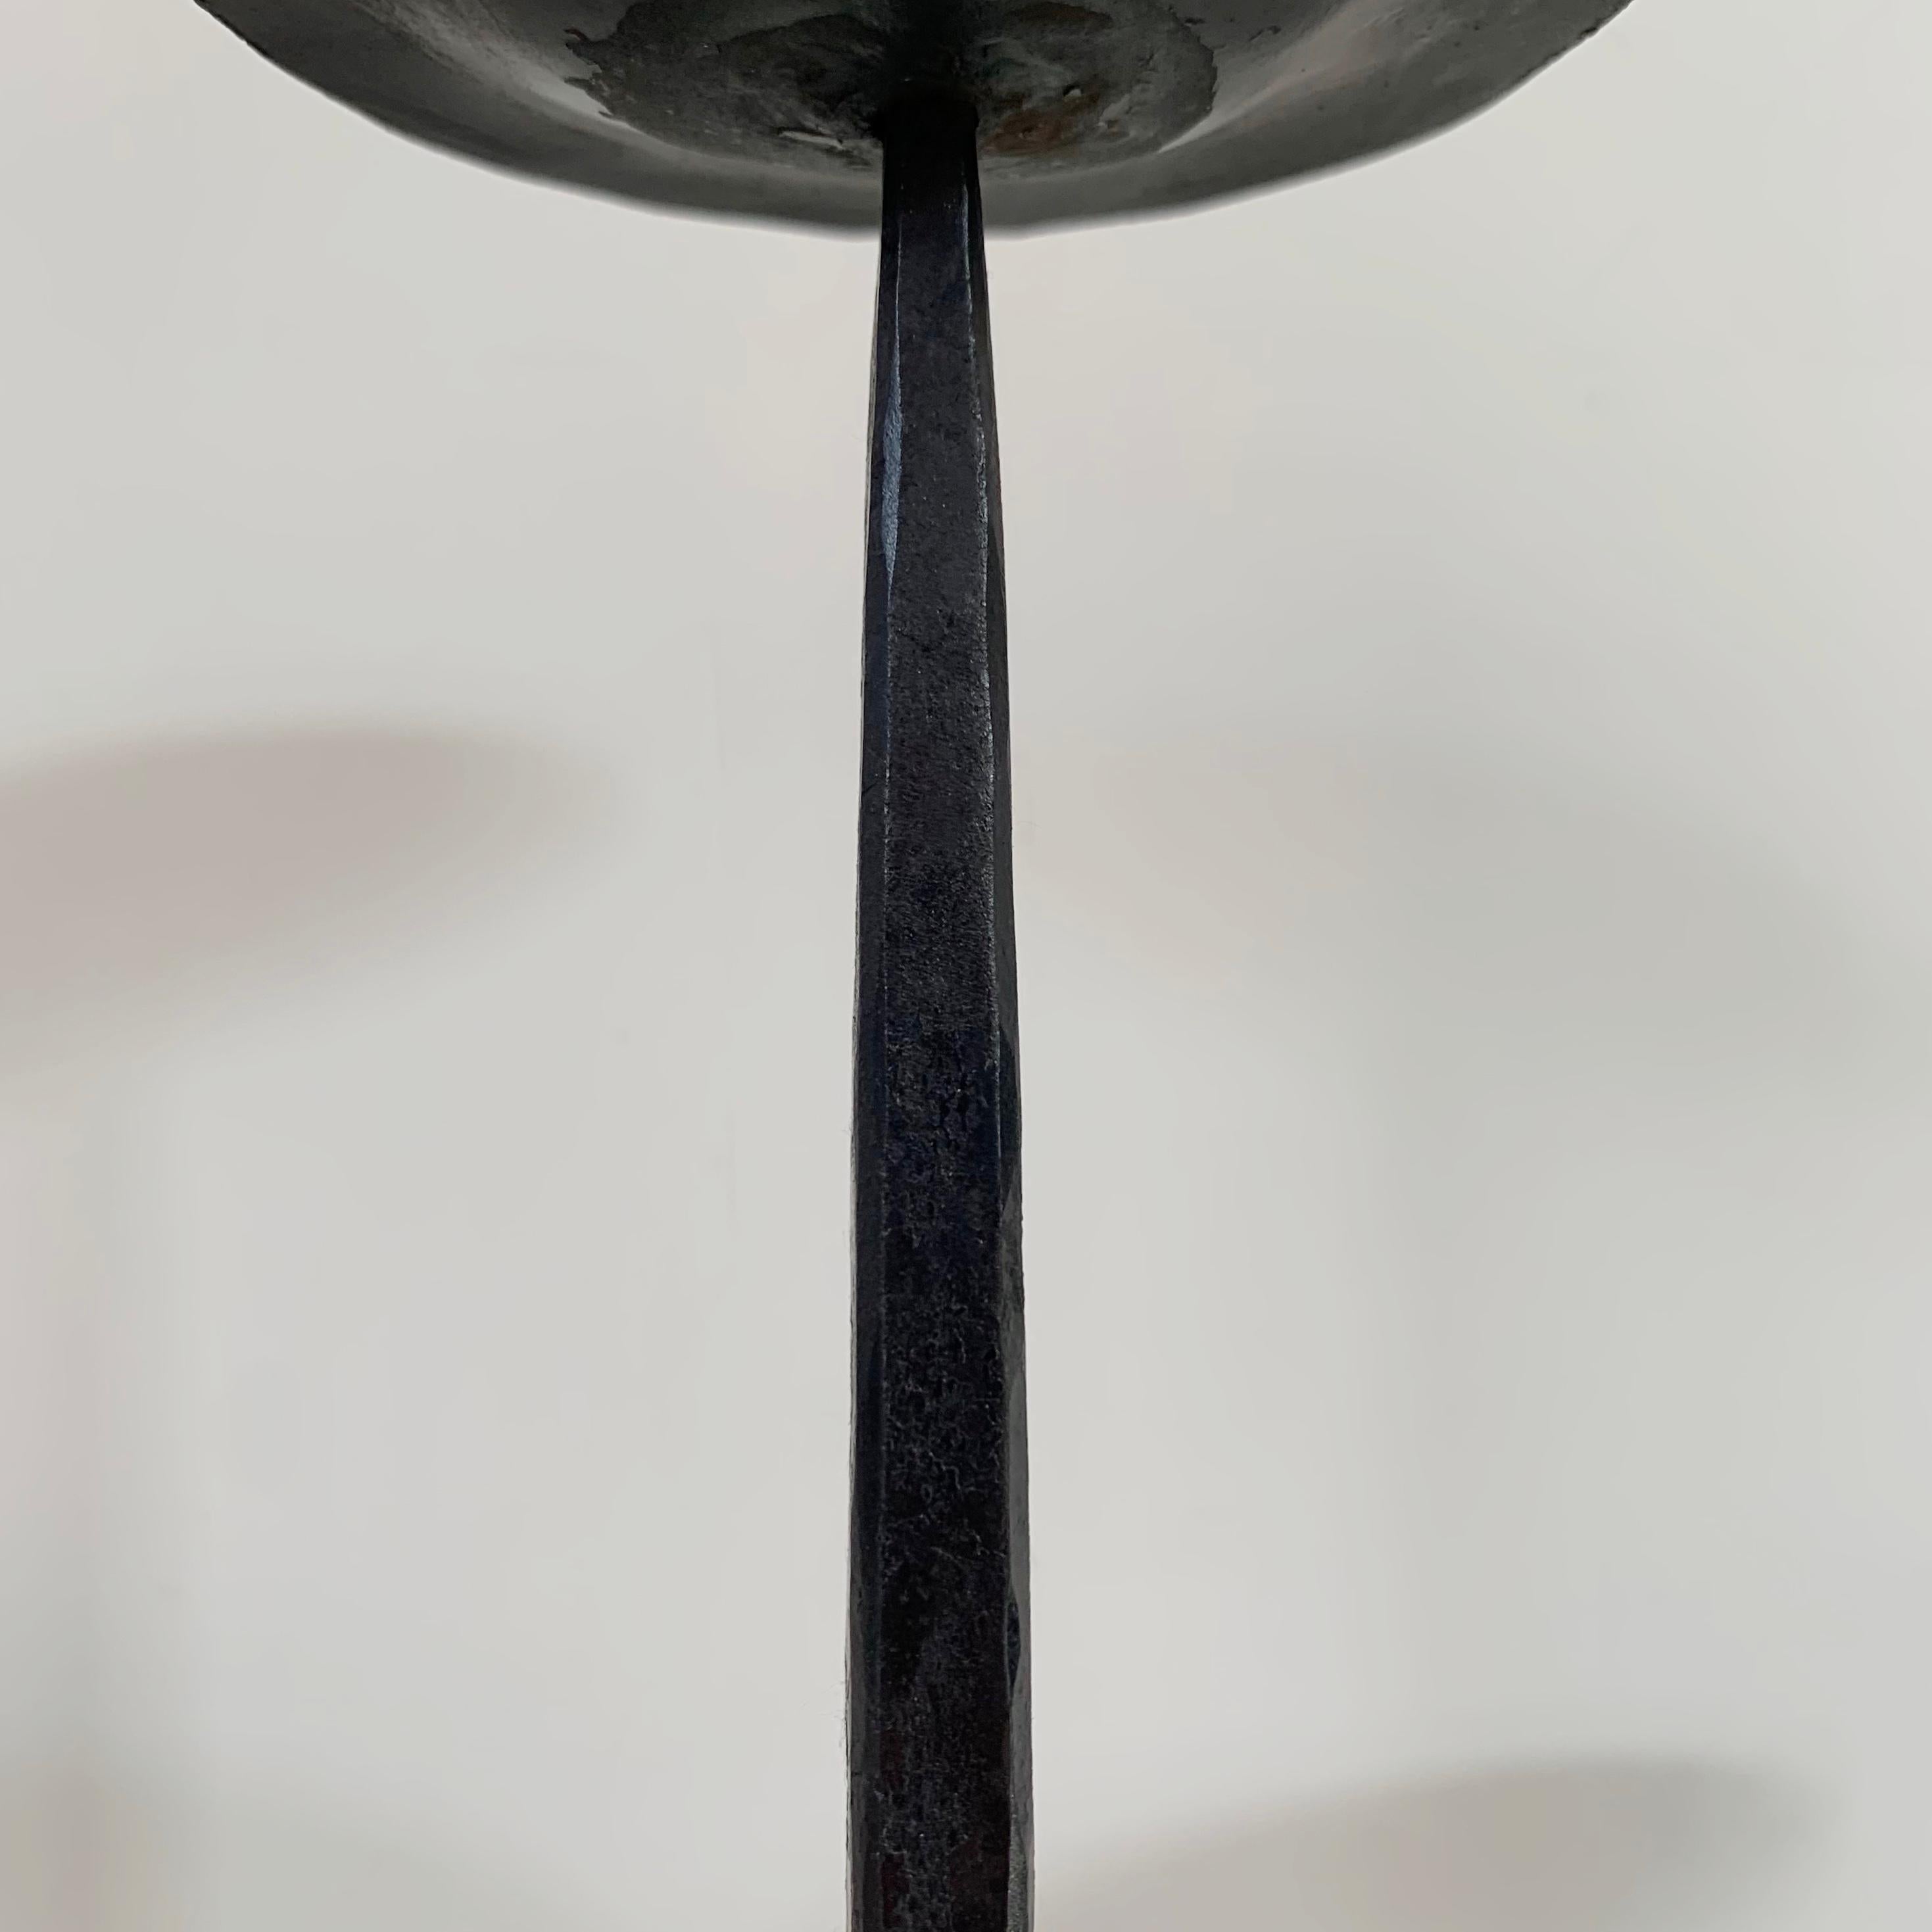 Wrought Iron Candlestick in the Style of Ateliers de Marolles, France c.1950 For Sale 7